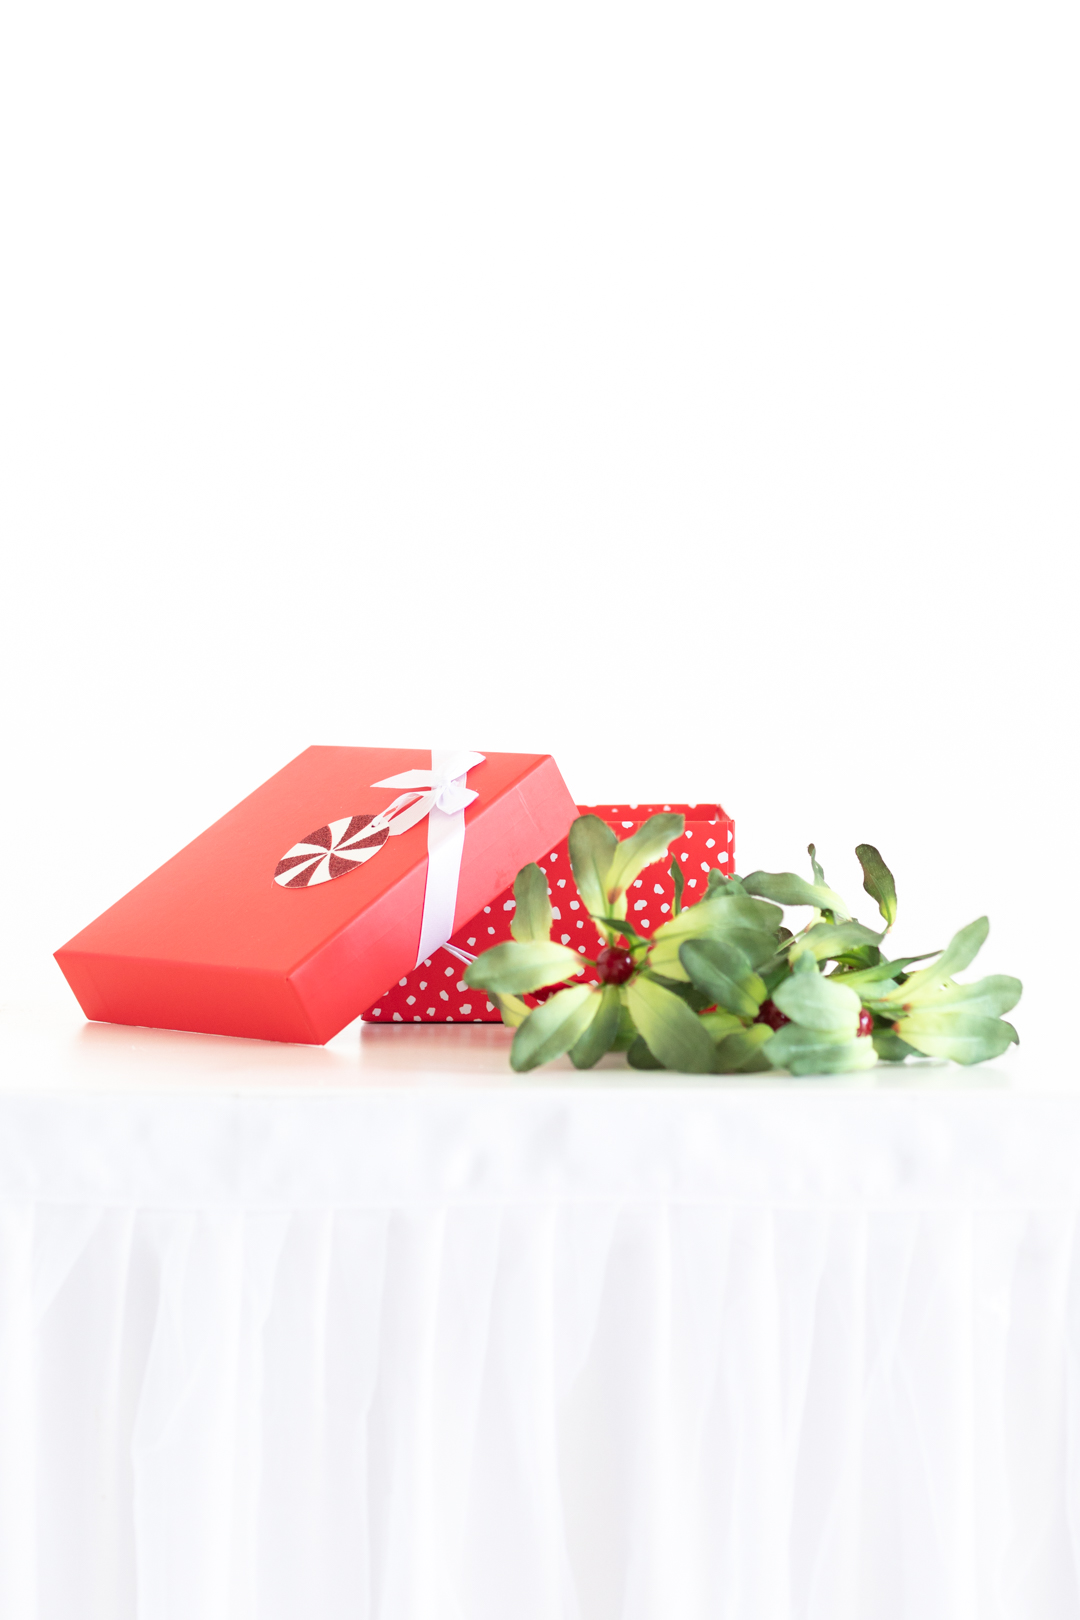 empty red gift box and mistletoe set out on a white table